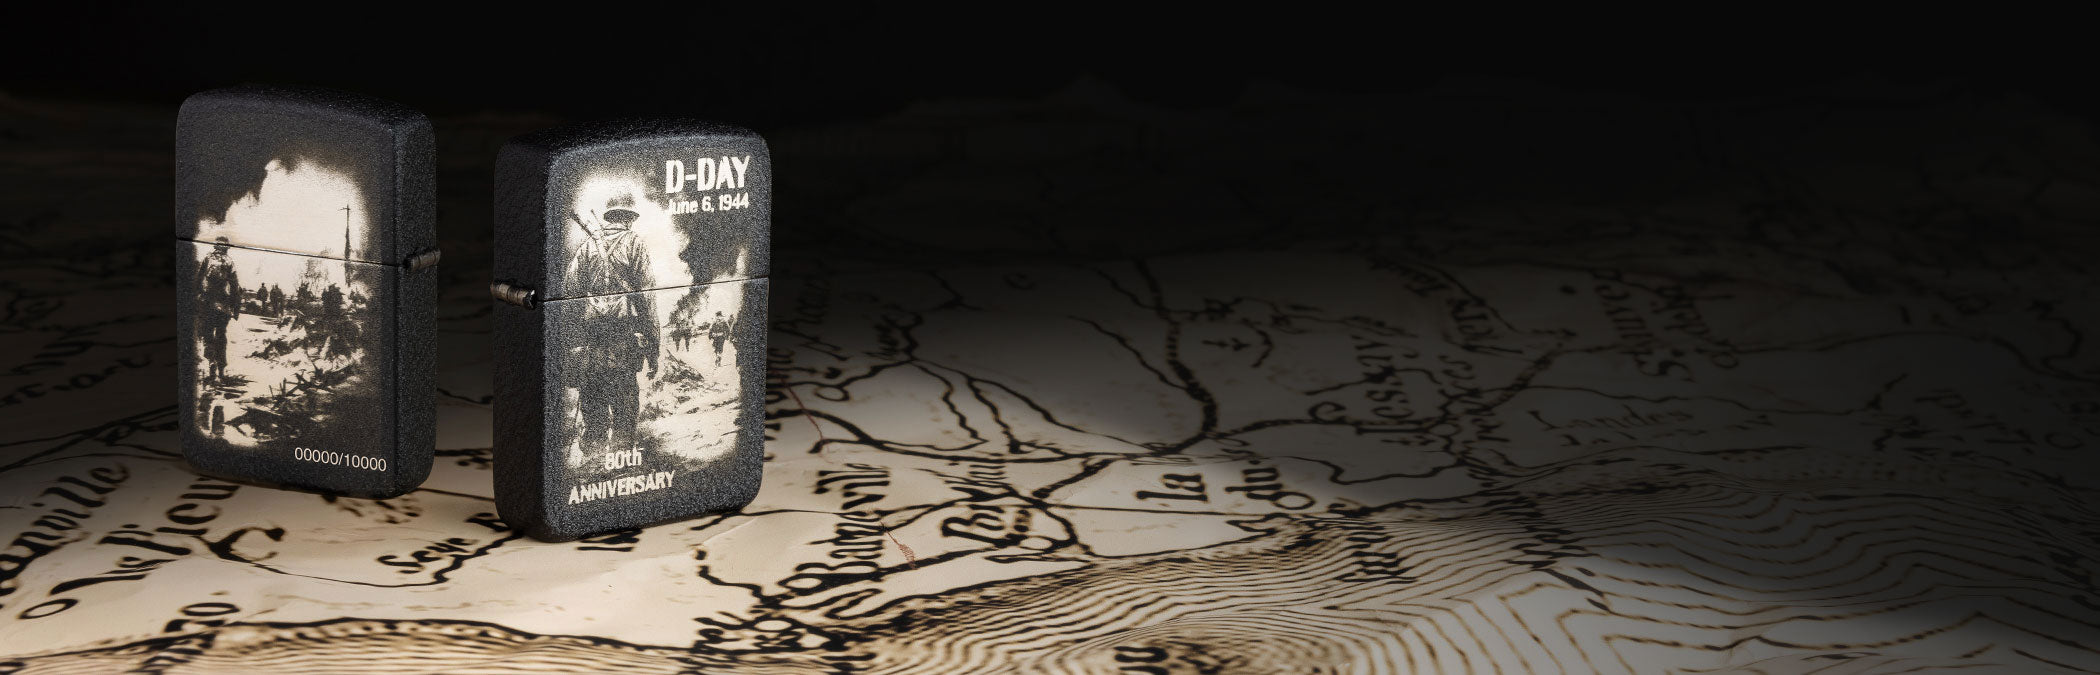 46261 Black Crackle 80th Anniversary D-Day Lighter - Limited Edition